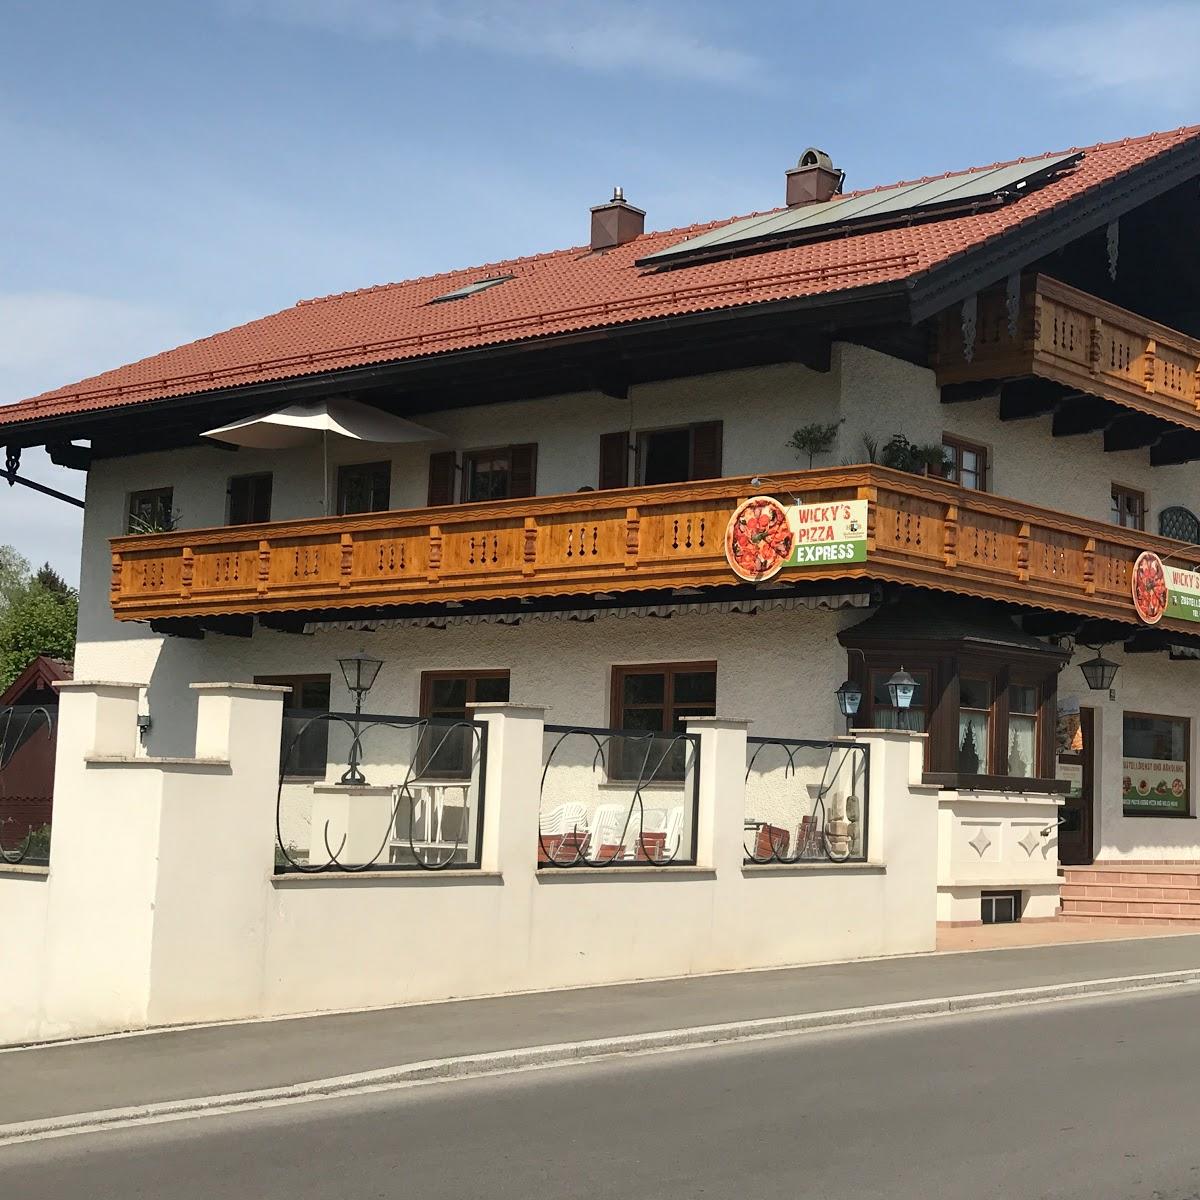 Restaurant "Wickys Pizza Express" in Übersee